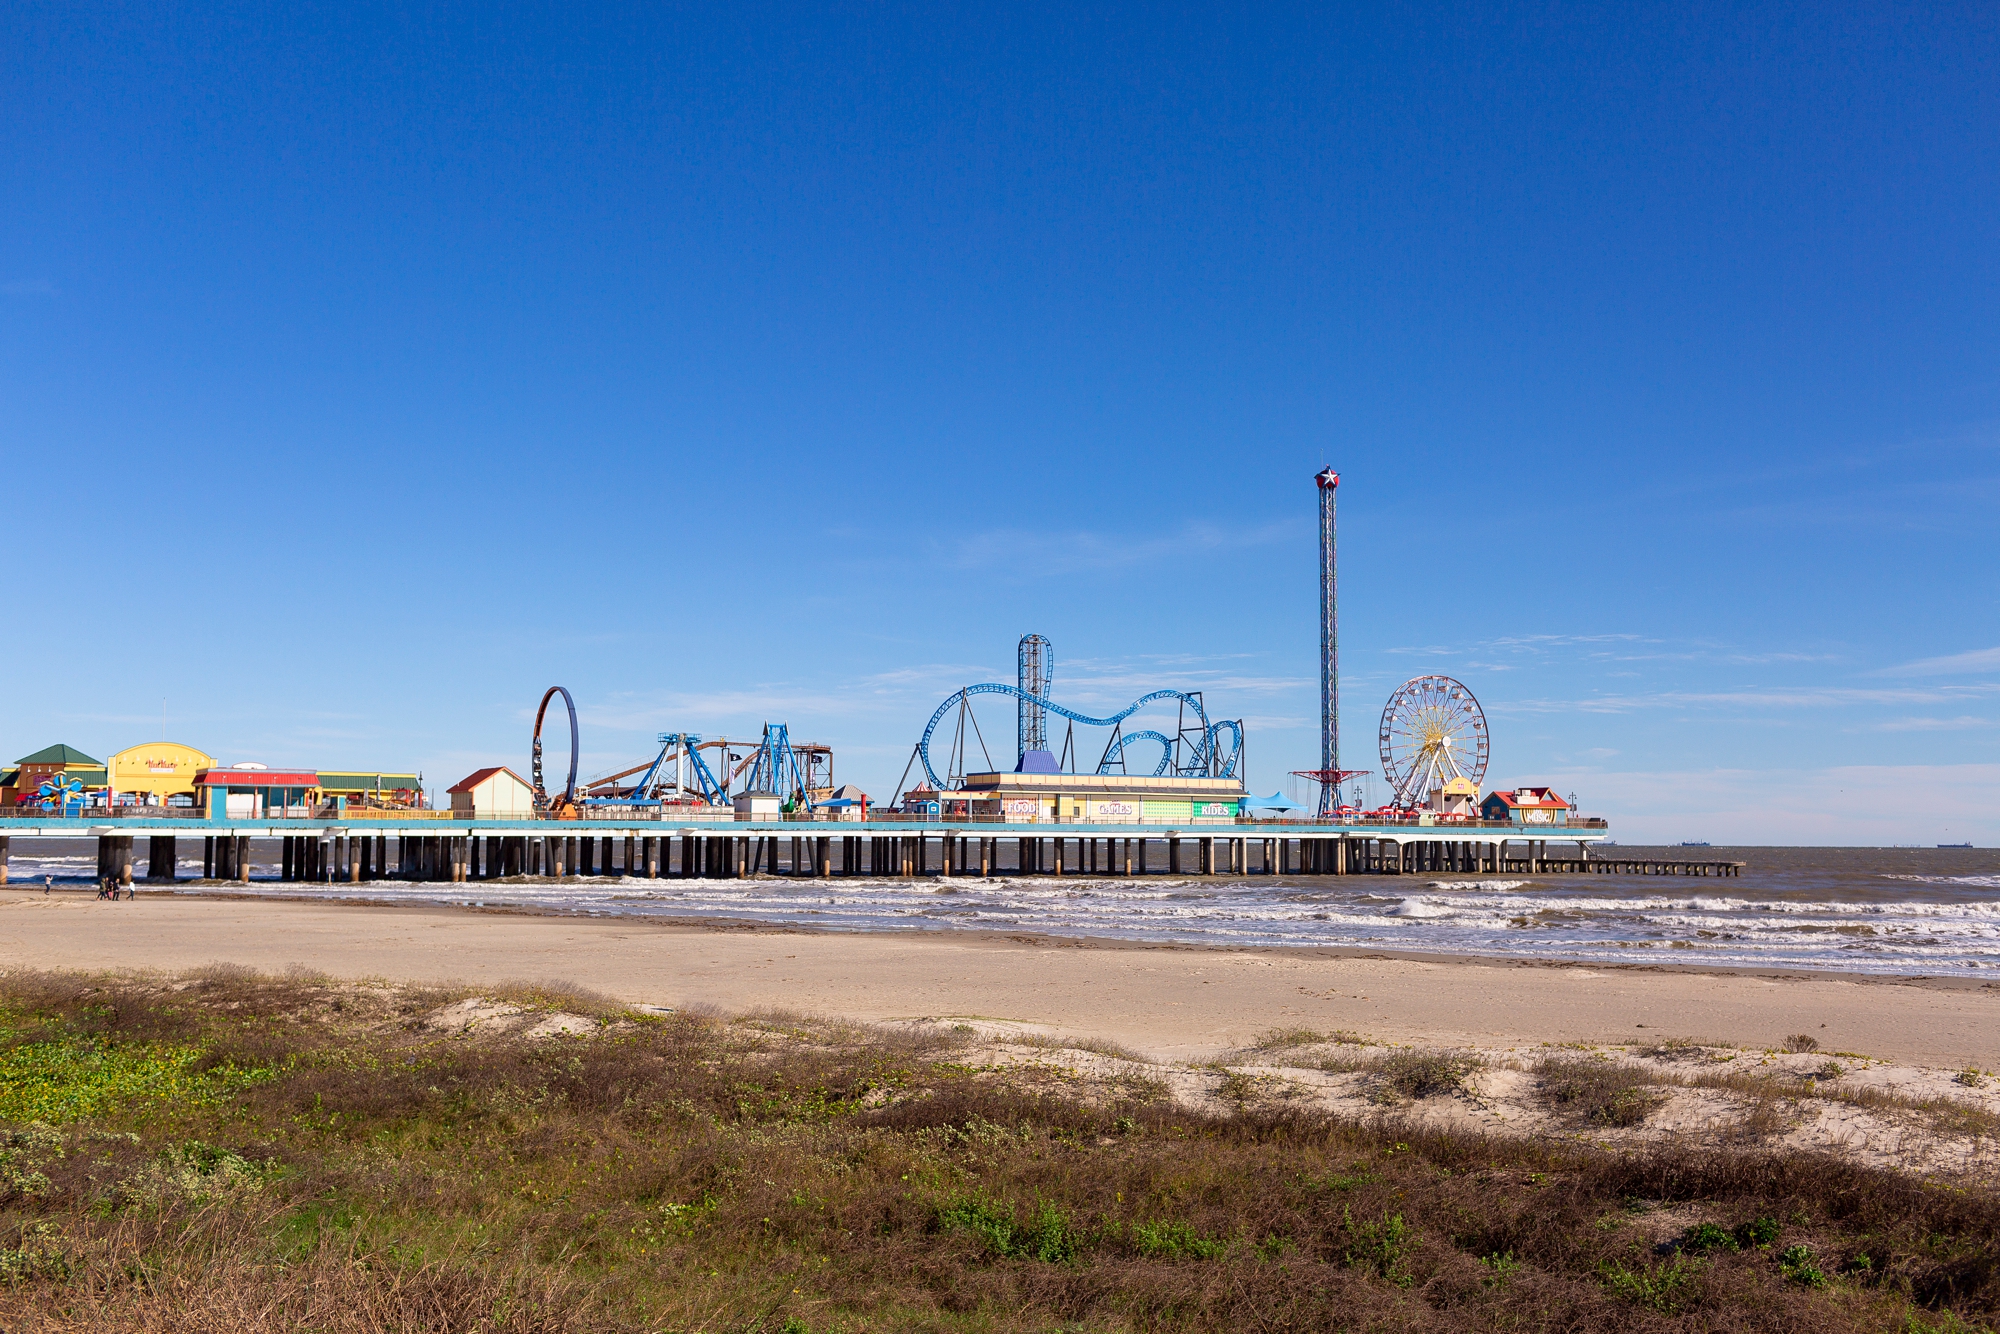 View of the Galveston Island Historic Pleasure Pier from the seawall